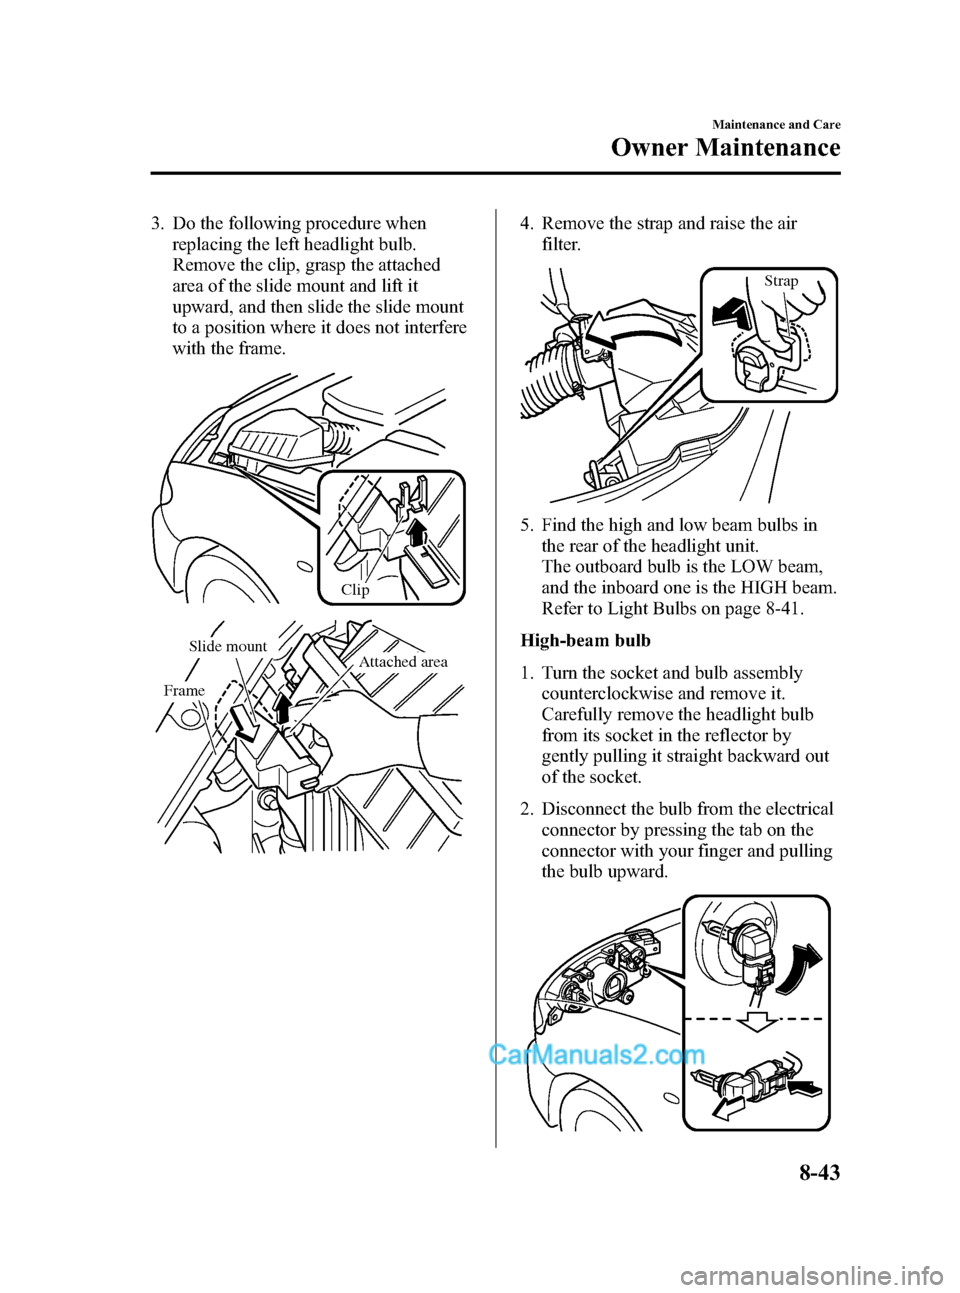 MAZDA MODEL MAZDASPEED 3 2007  Owners Manual (in English) Black plate (317,1)
3. Do the following procedure when
replacing the left headlight bulb.
Remove the clip, grasp the attached
area of the slide mount and lift it
upward, and then slide the slide mount